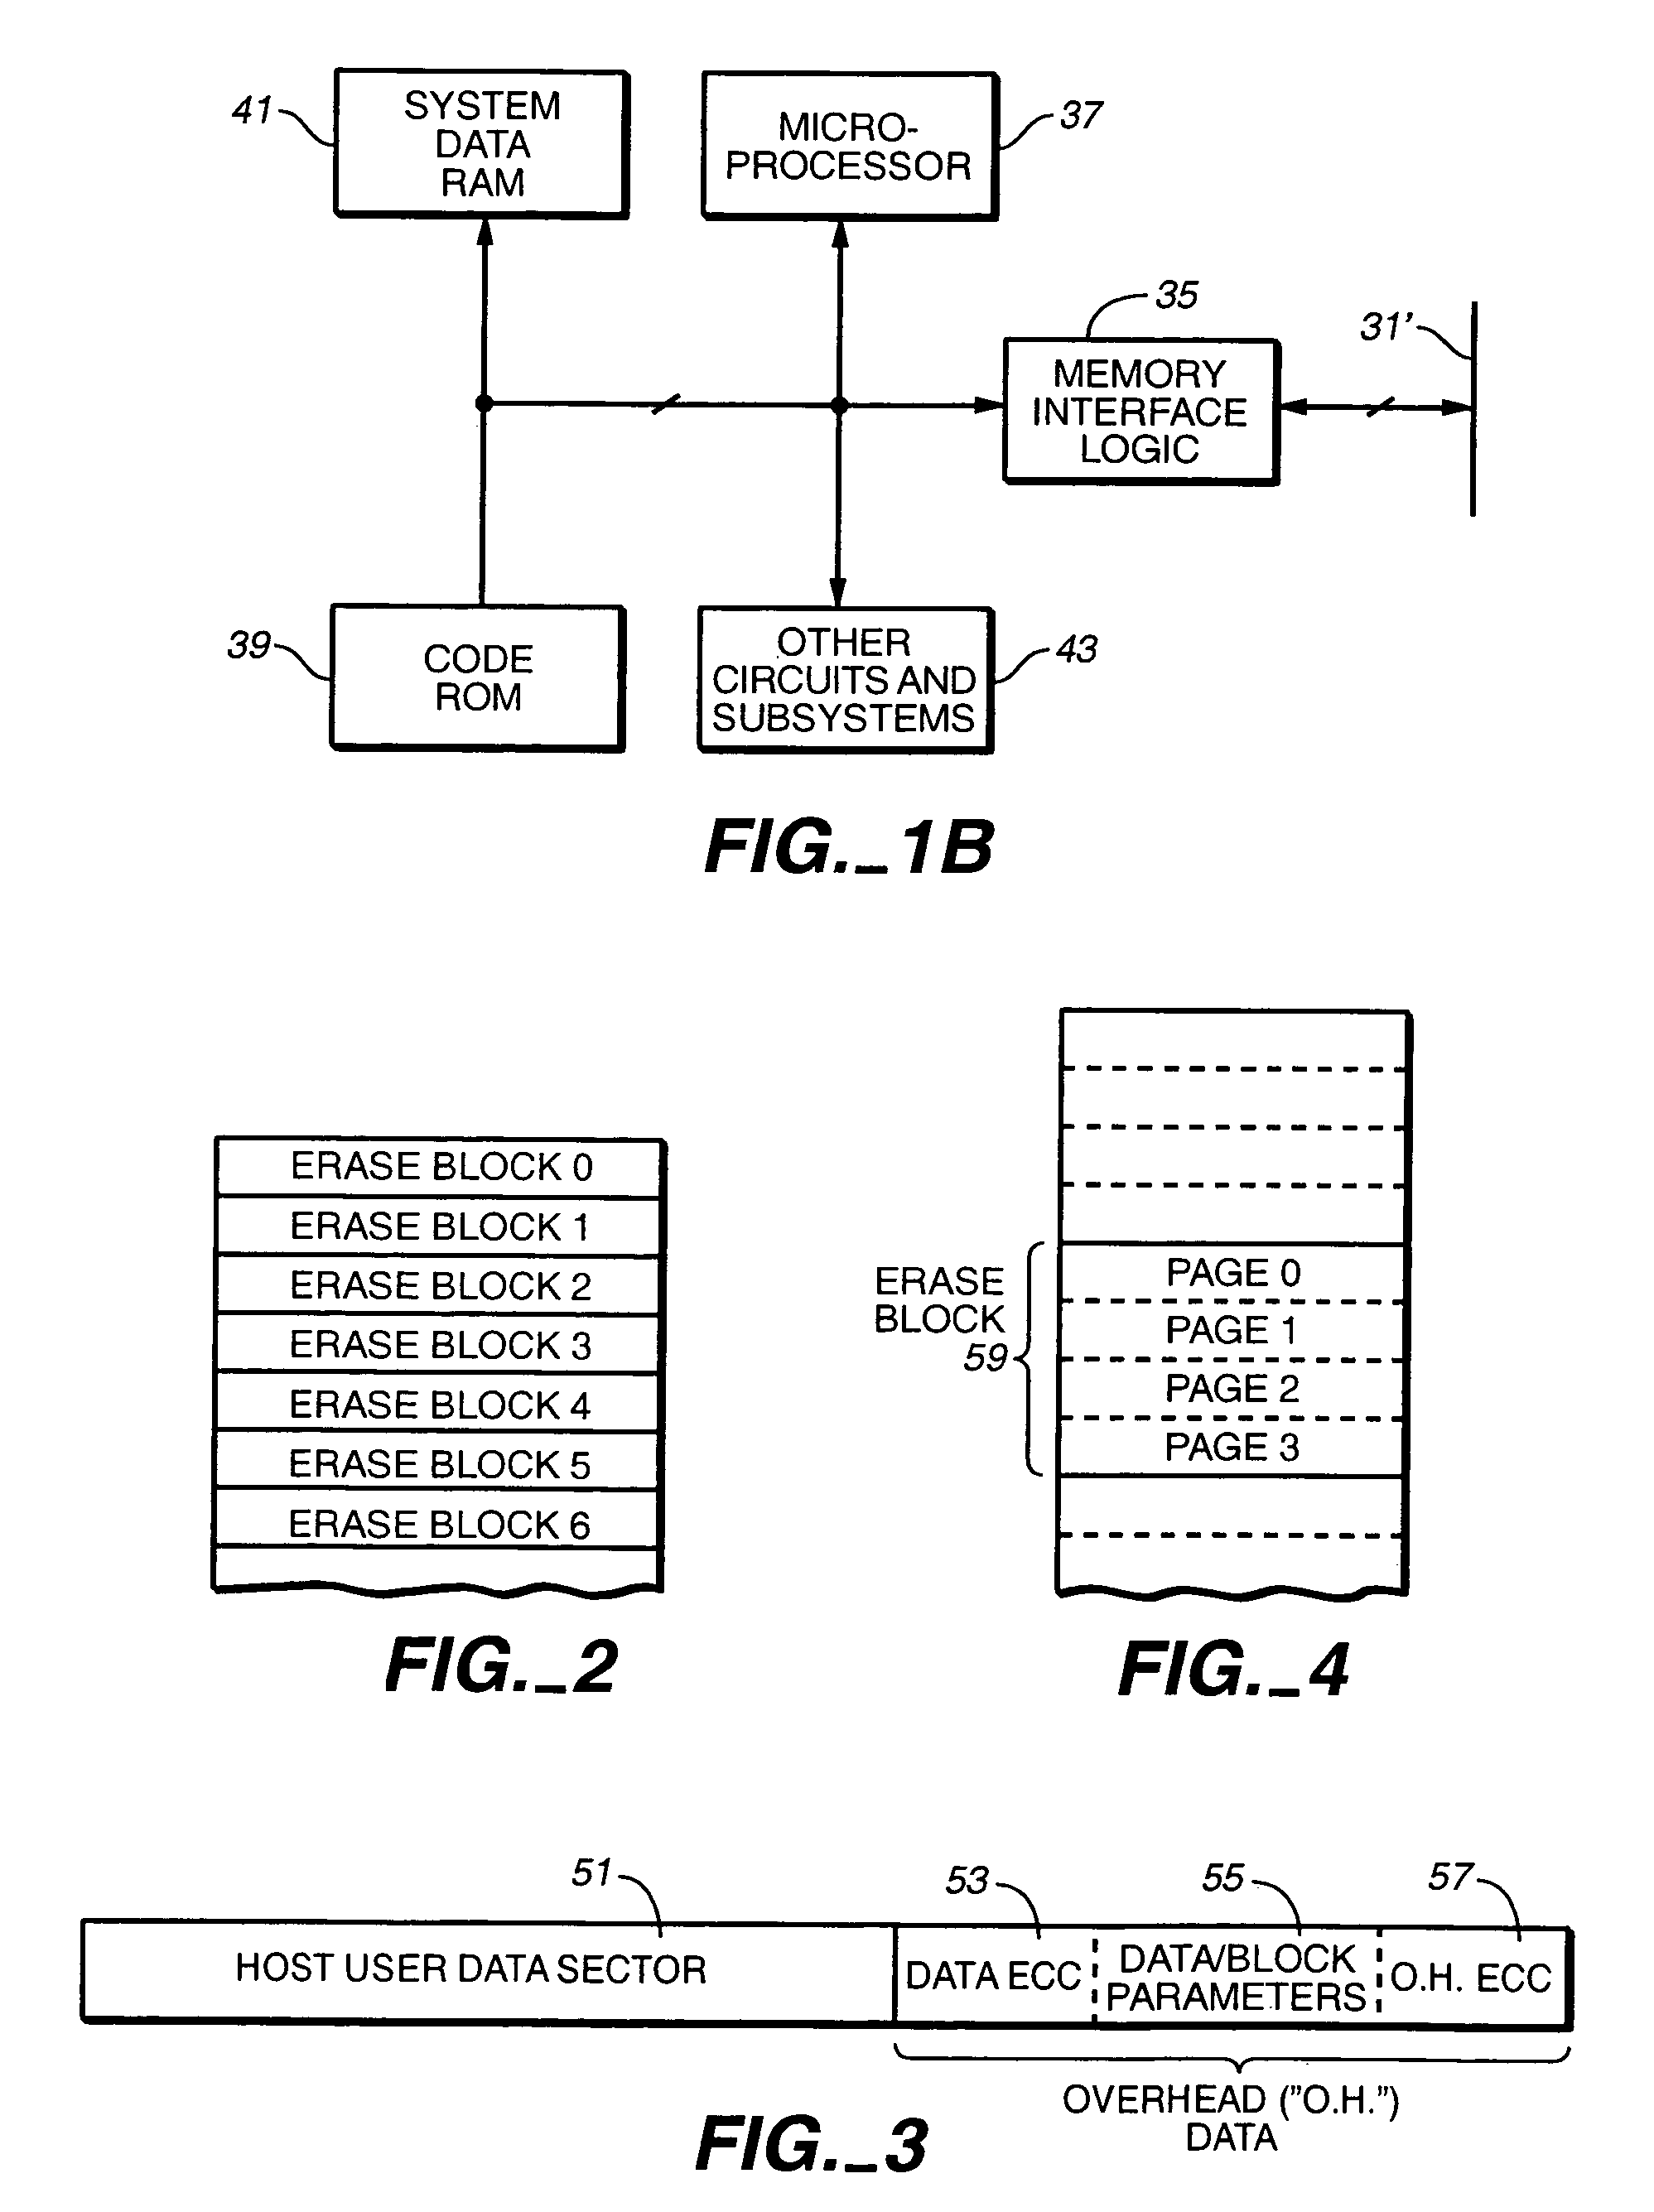 Non-volatile memory and method with multi-stream update tracking